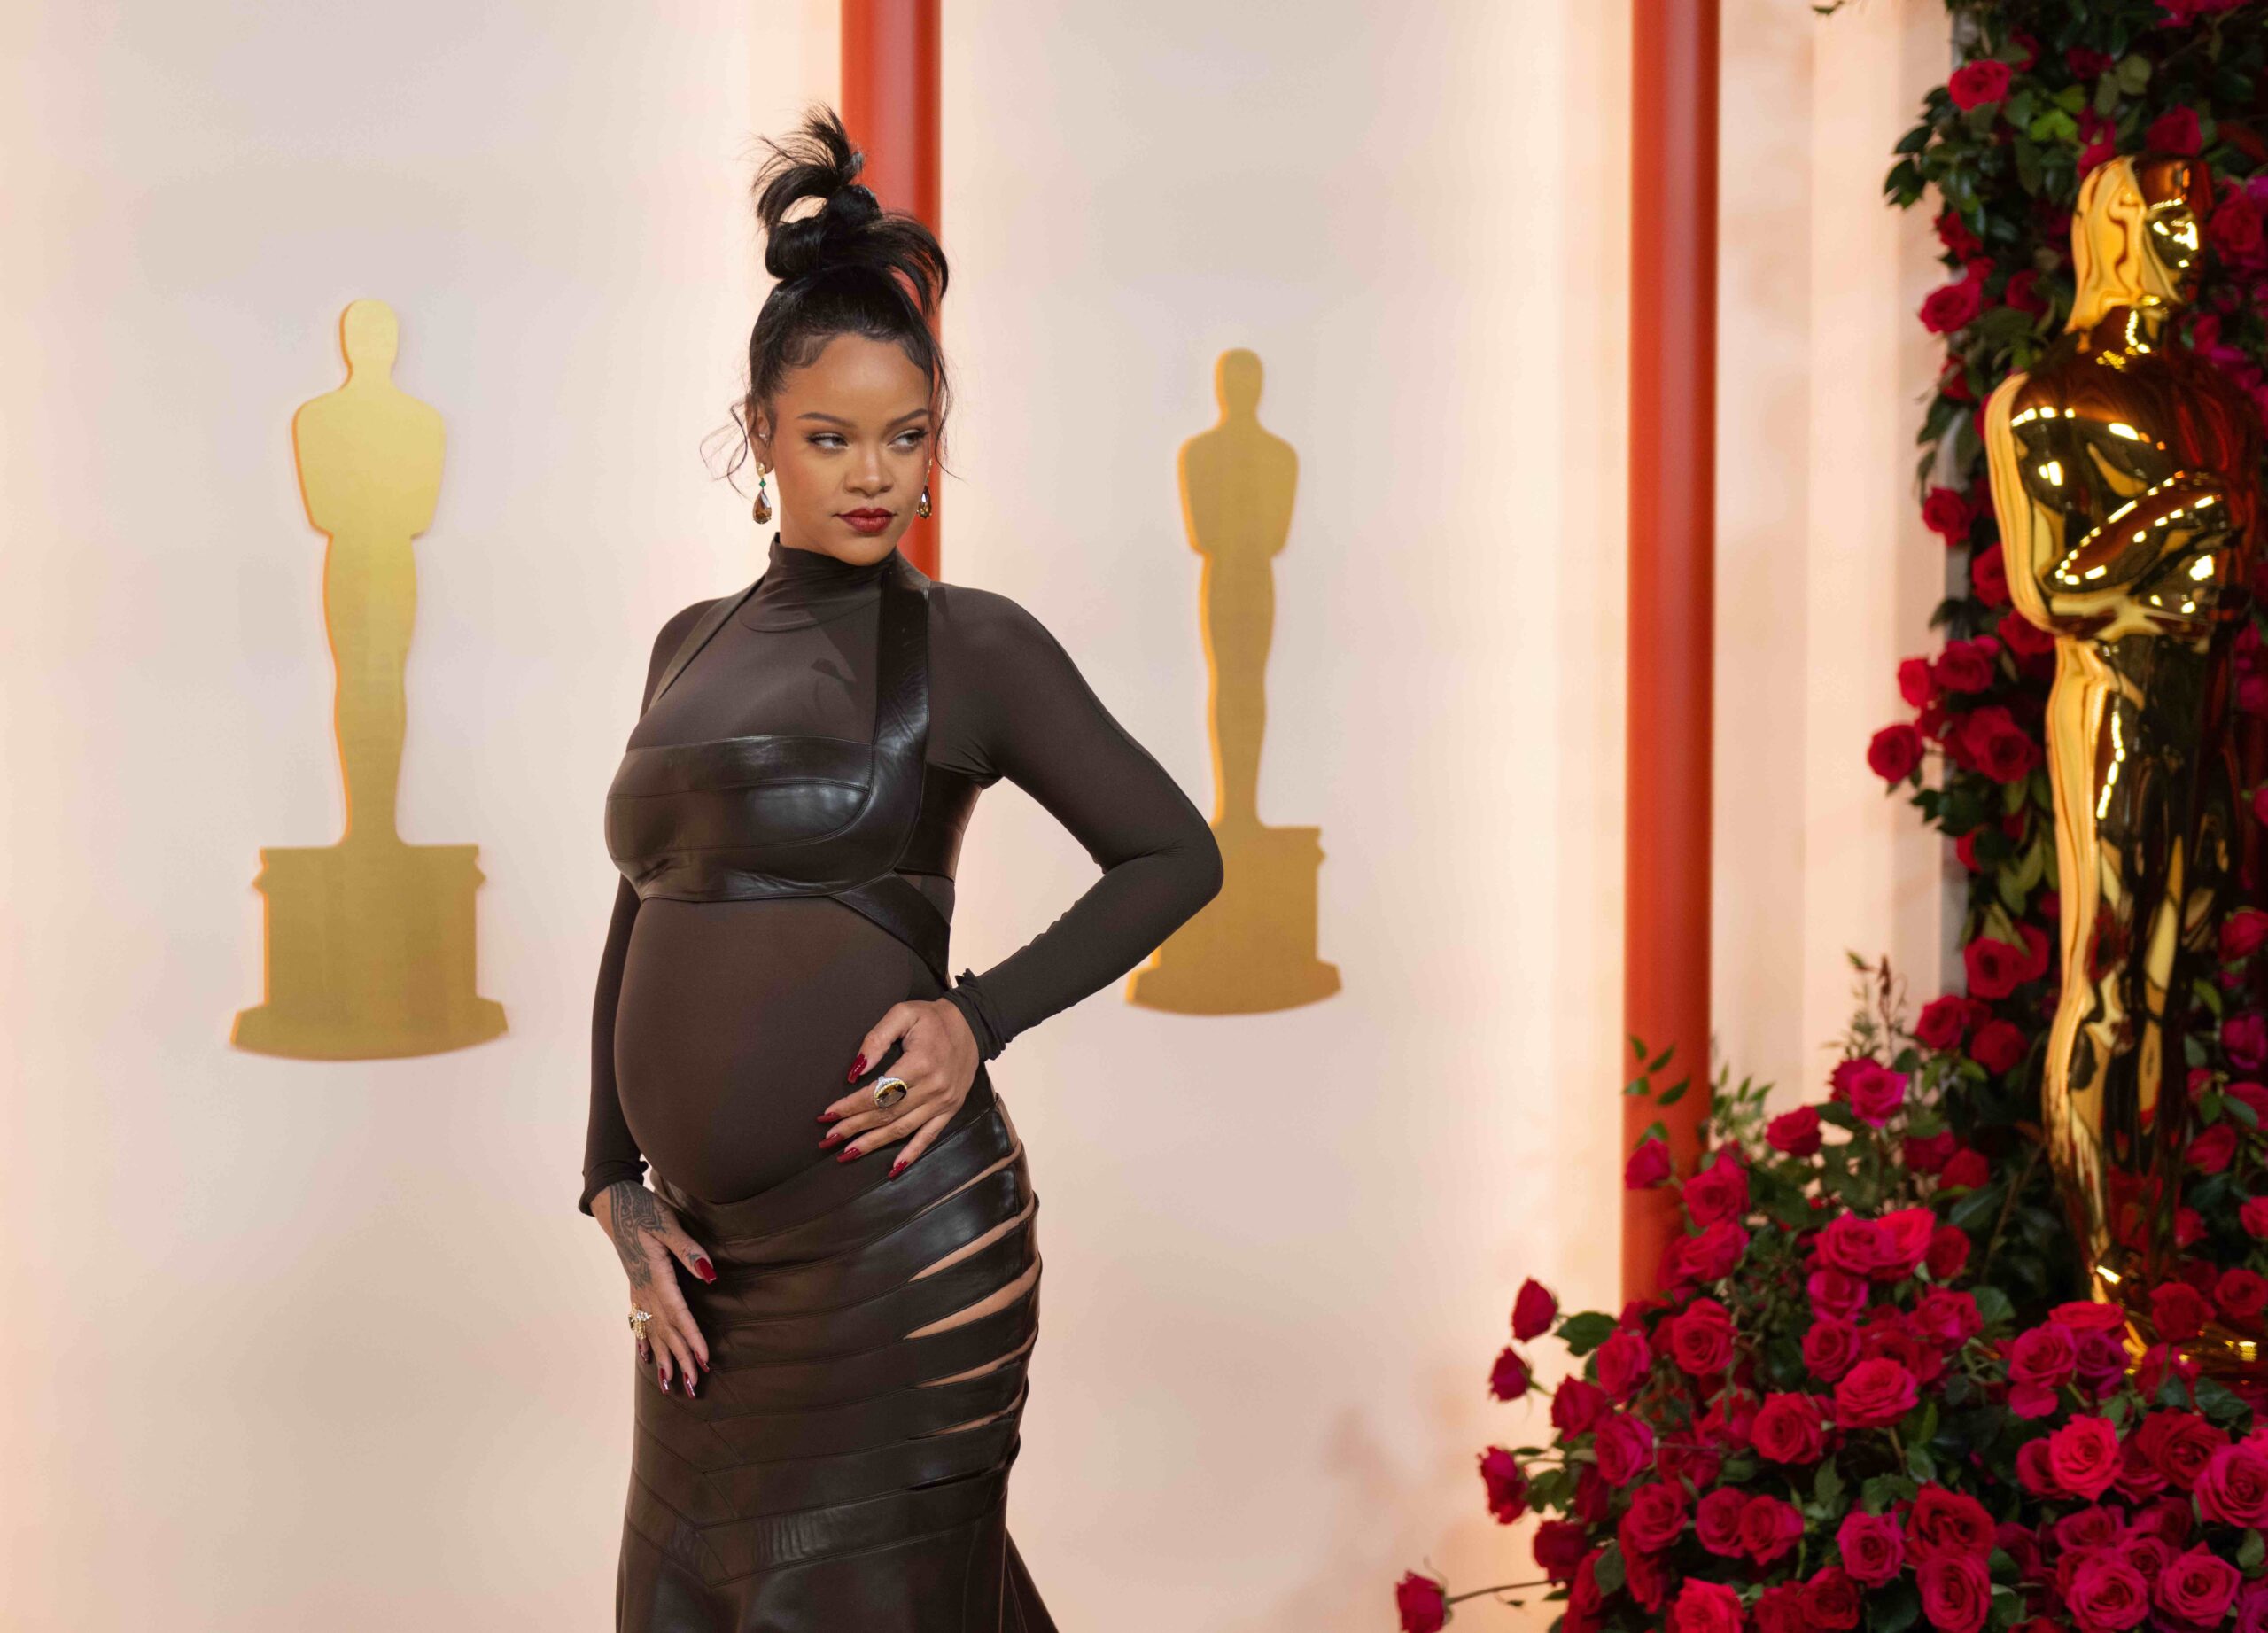 Rihanna arrived on the red carpet in a brown chocolate sheer vegan leather dress that turned heads